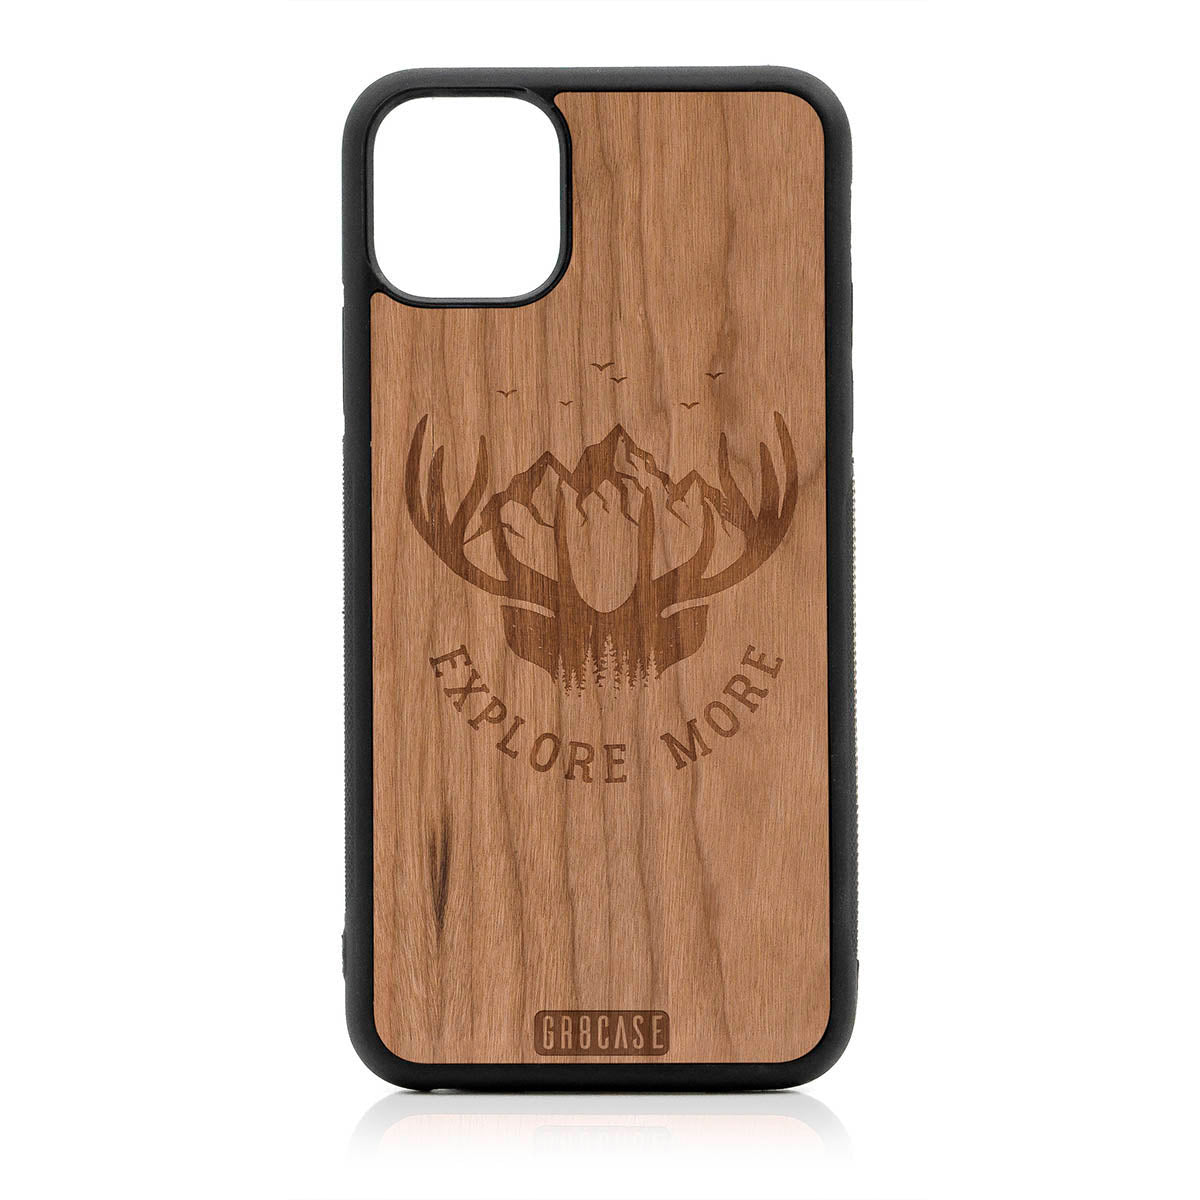 Explore More (Forest, Mountains & Antlers) Design Wood Case For iPhone 11 Pro Max by GR8CASE